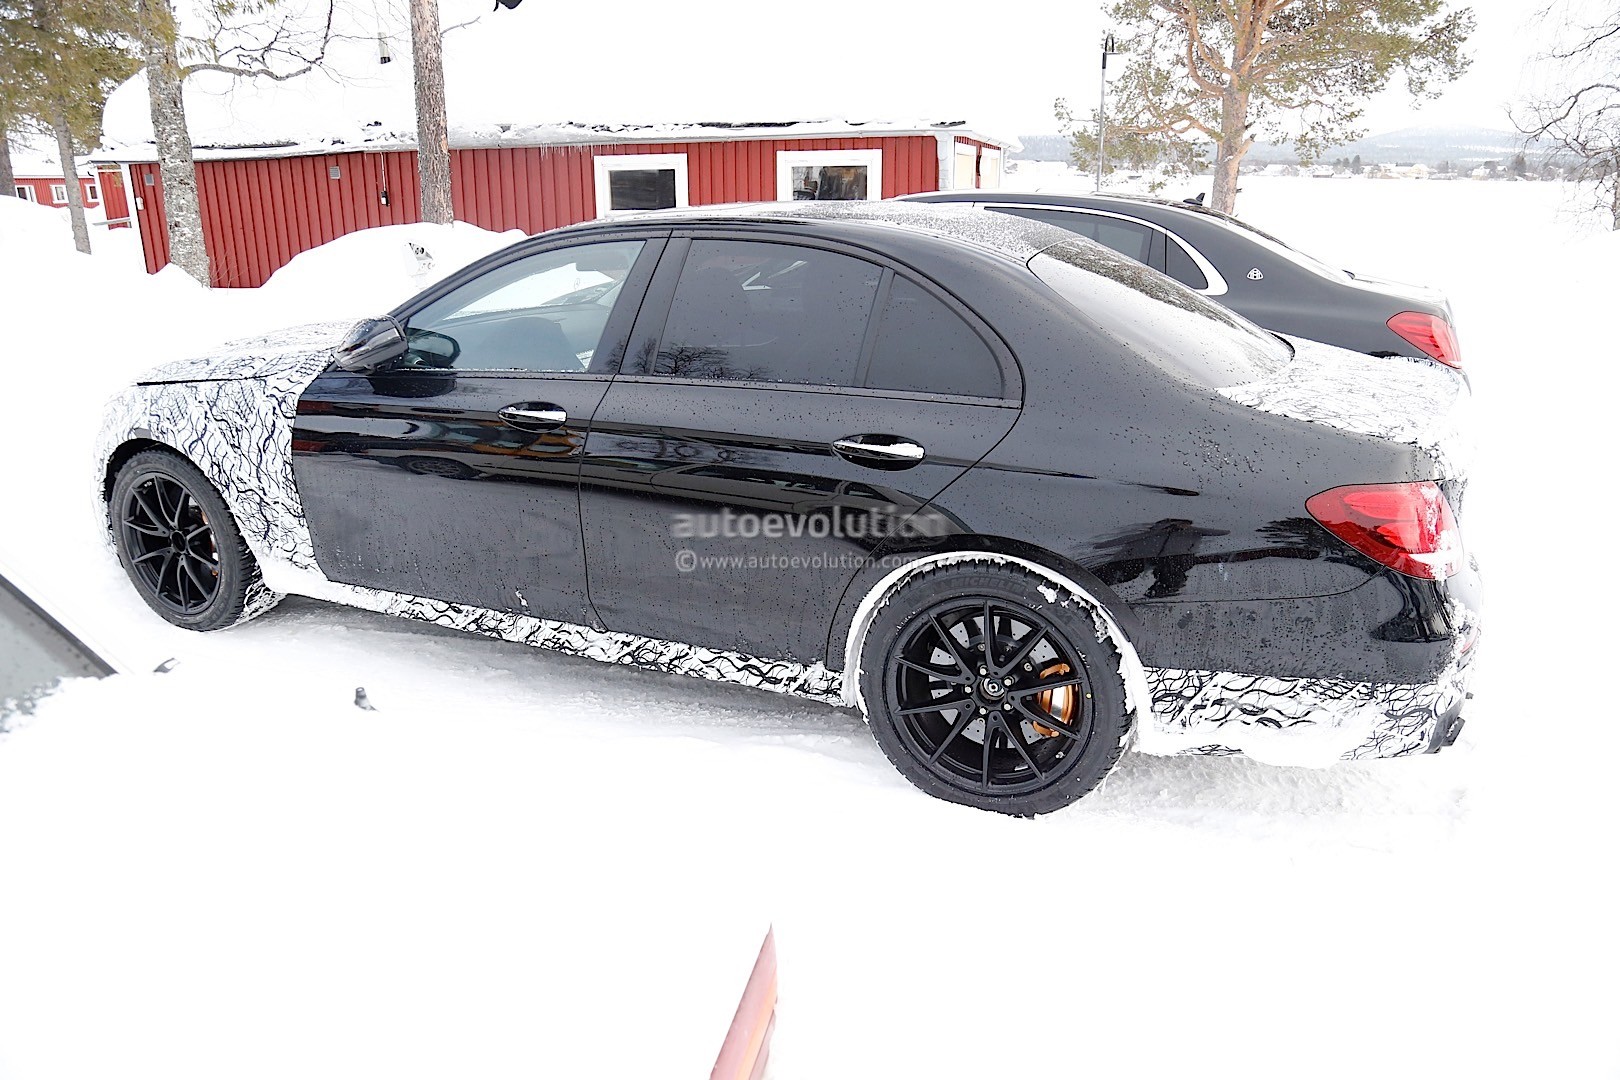 17 Mercedes Amg E63 Loses Most Of Its Camouflage Shows Bling Brake Calipers Autoevolution